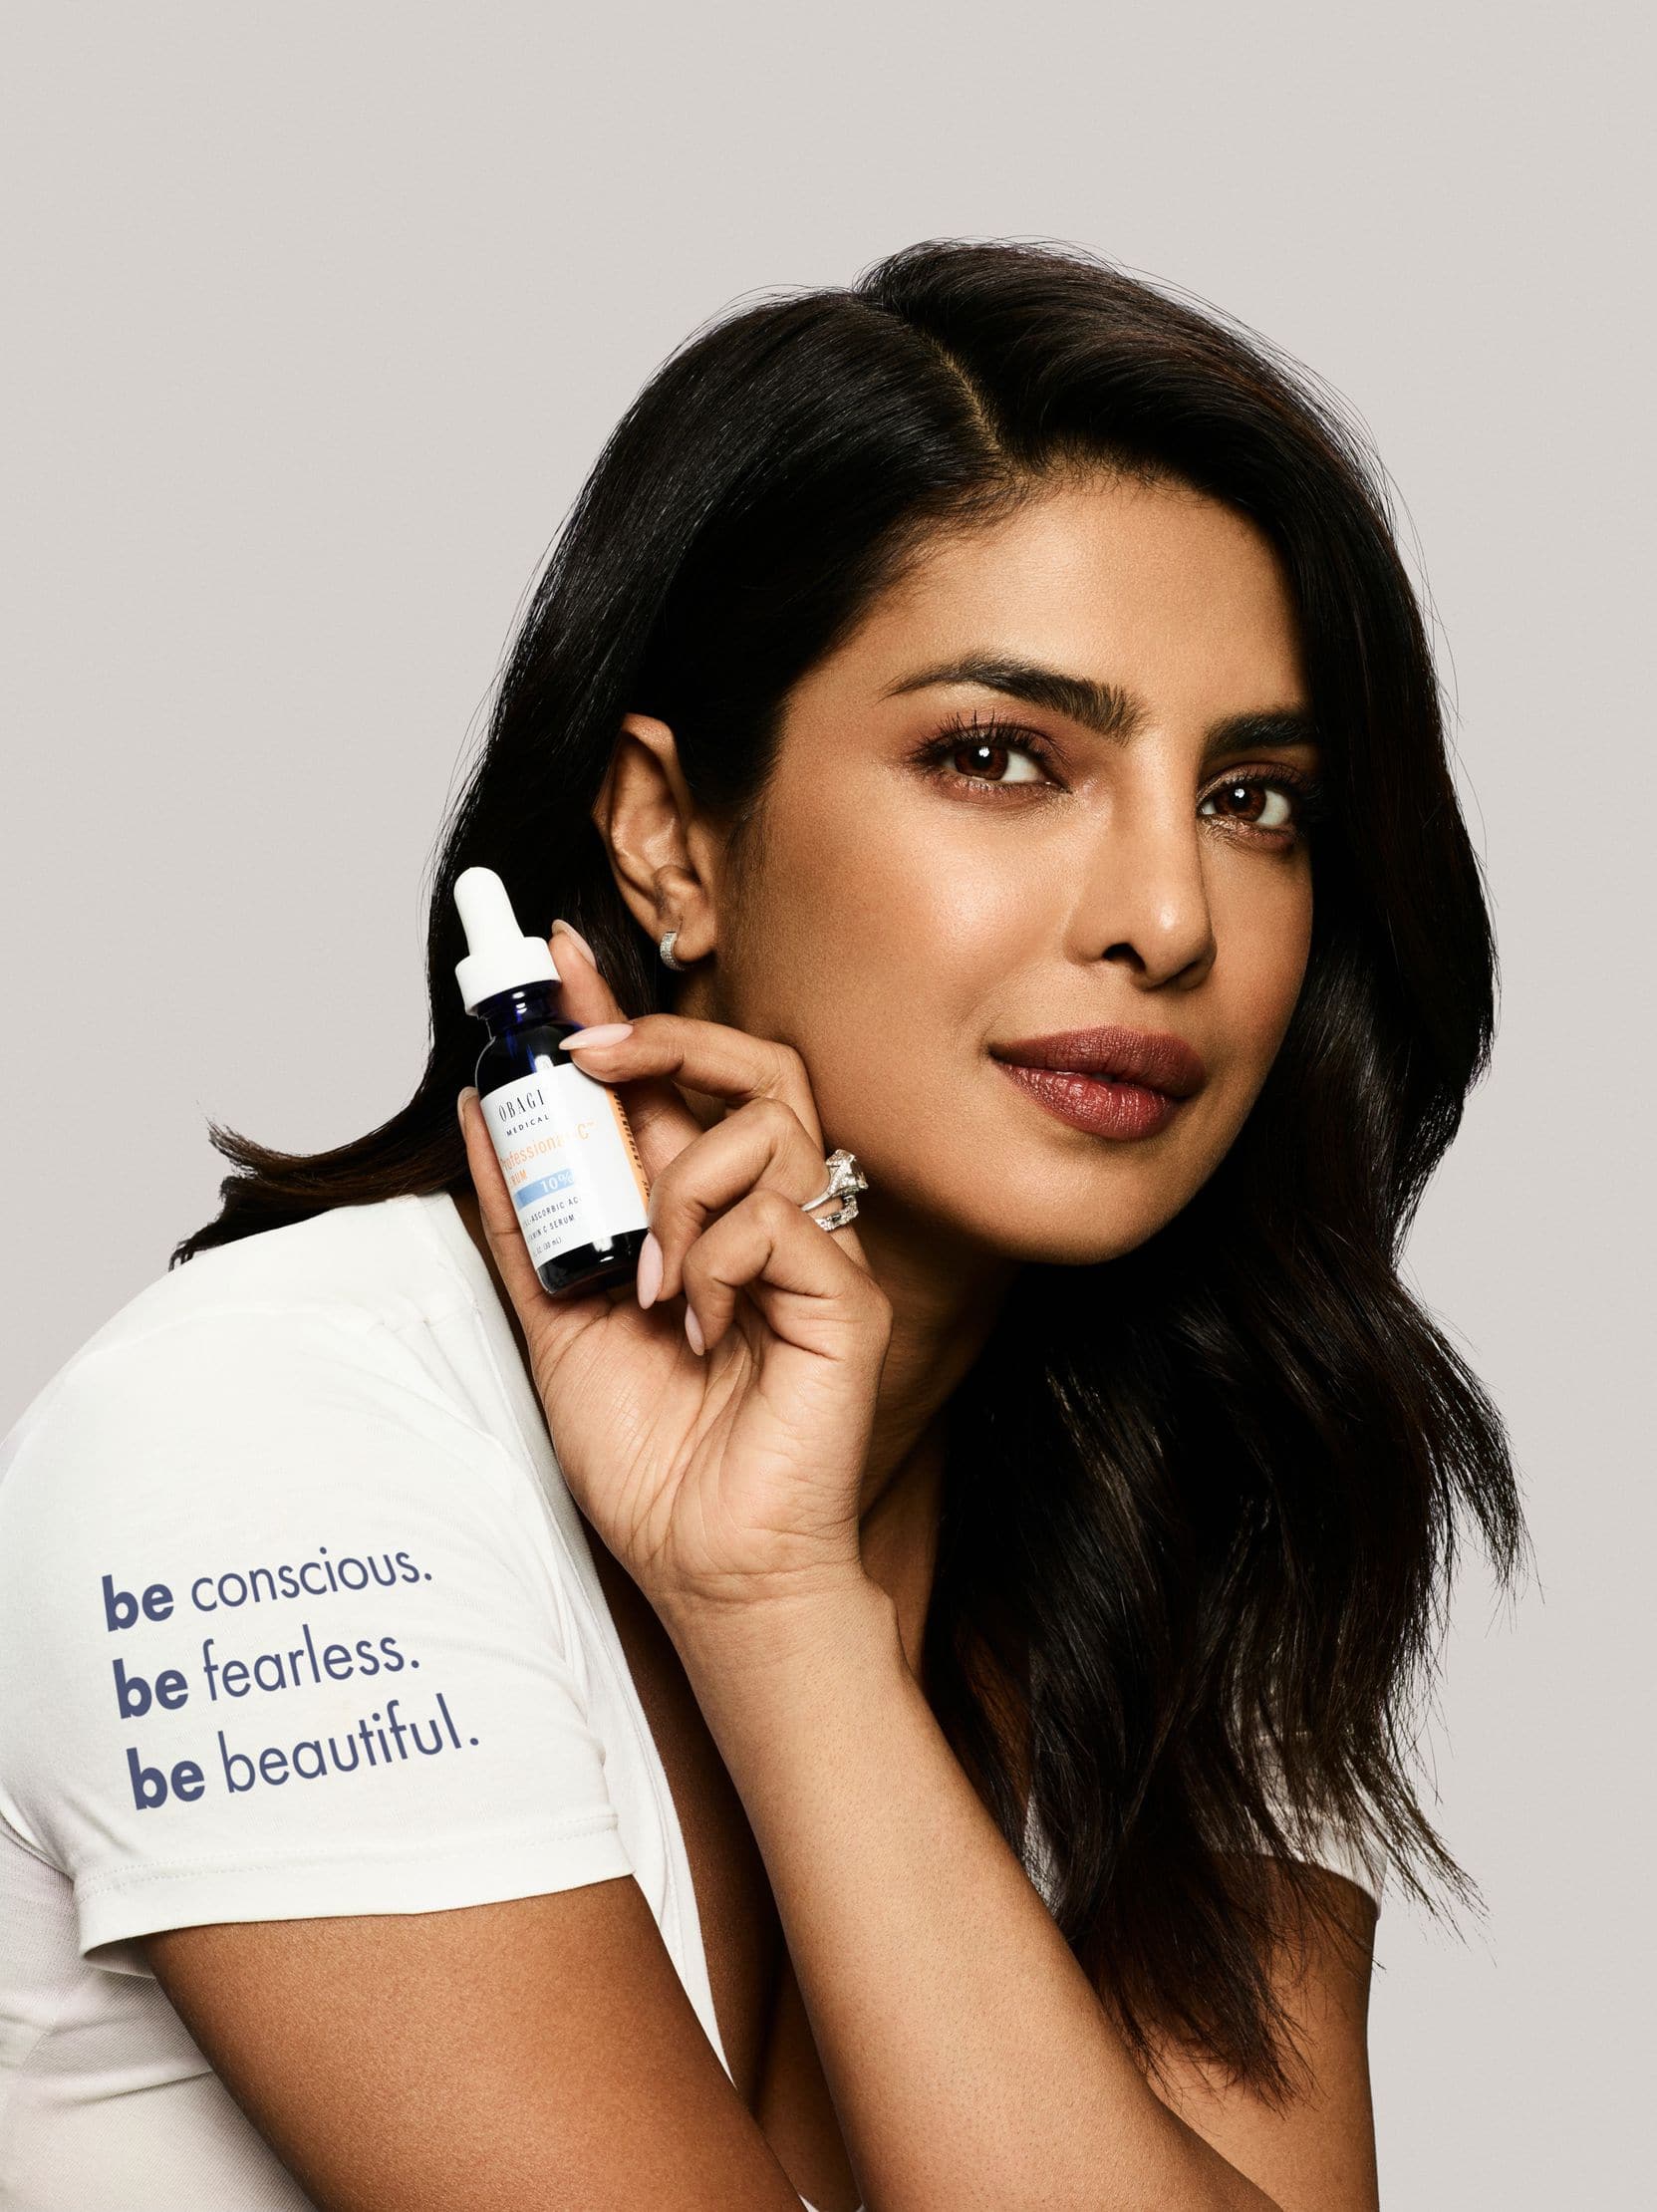 What got Priyanka Chopra to become the face of Obagi, a brand we’ve always loved